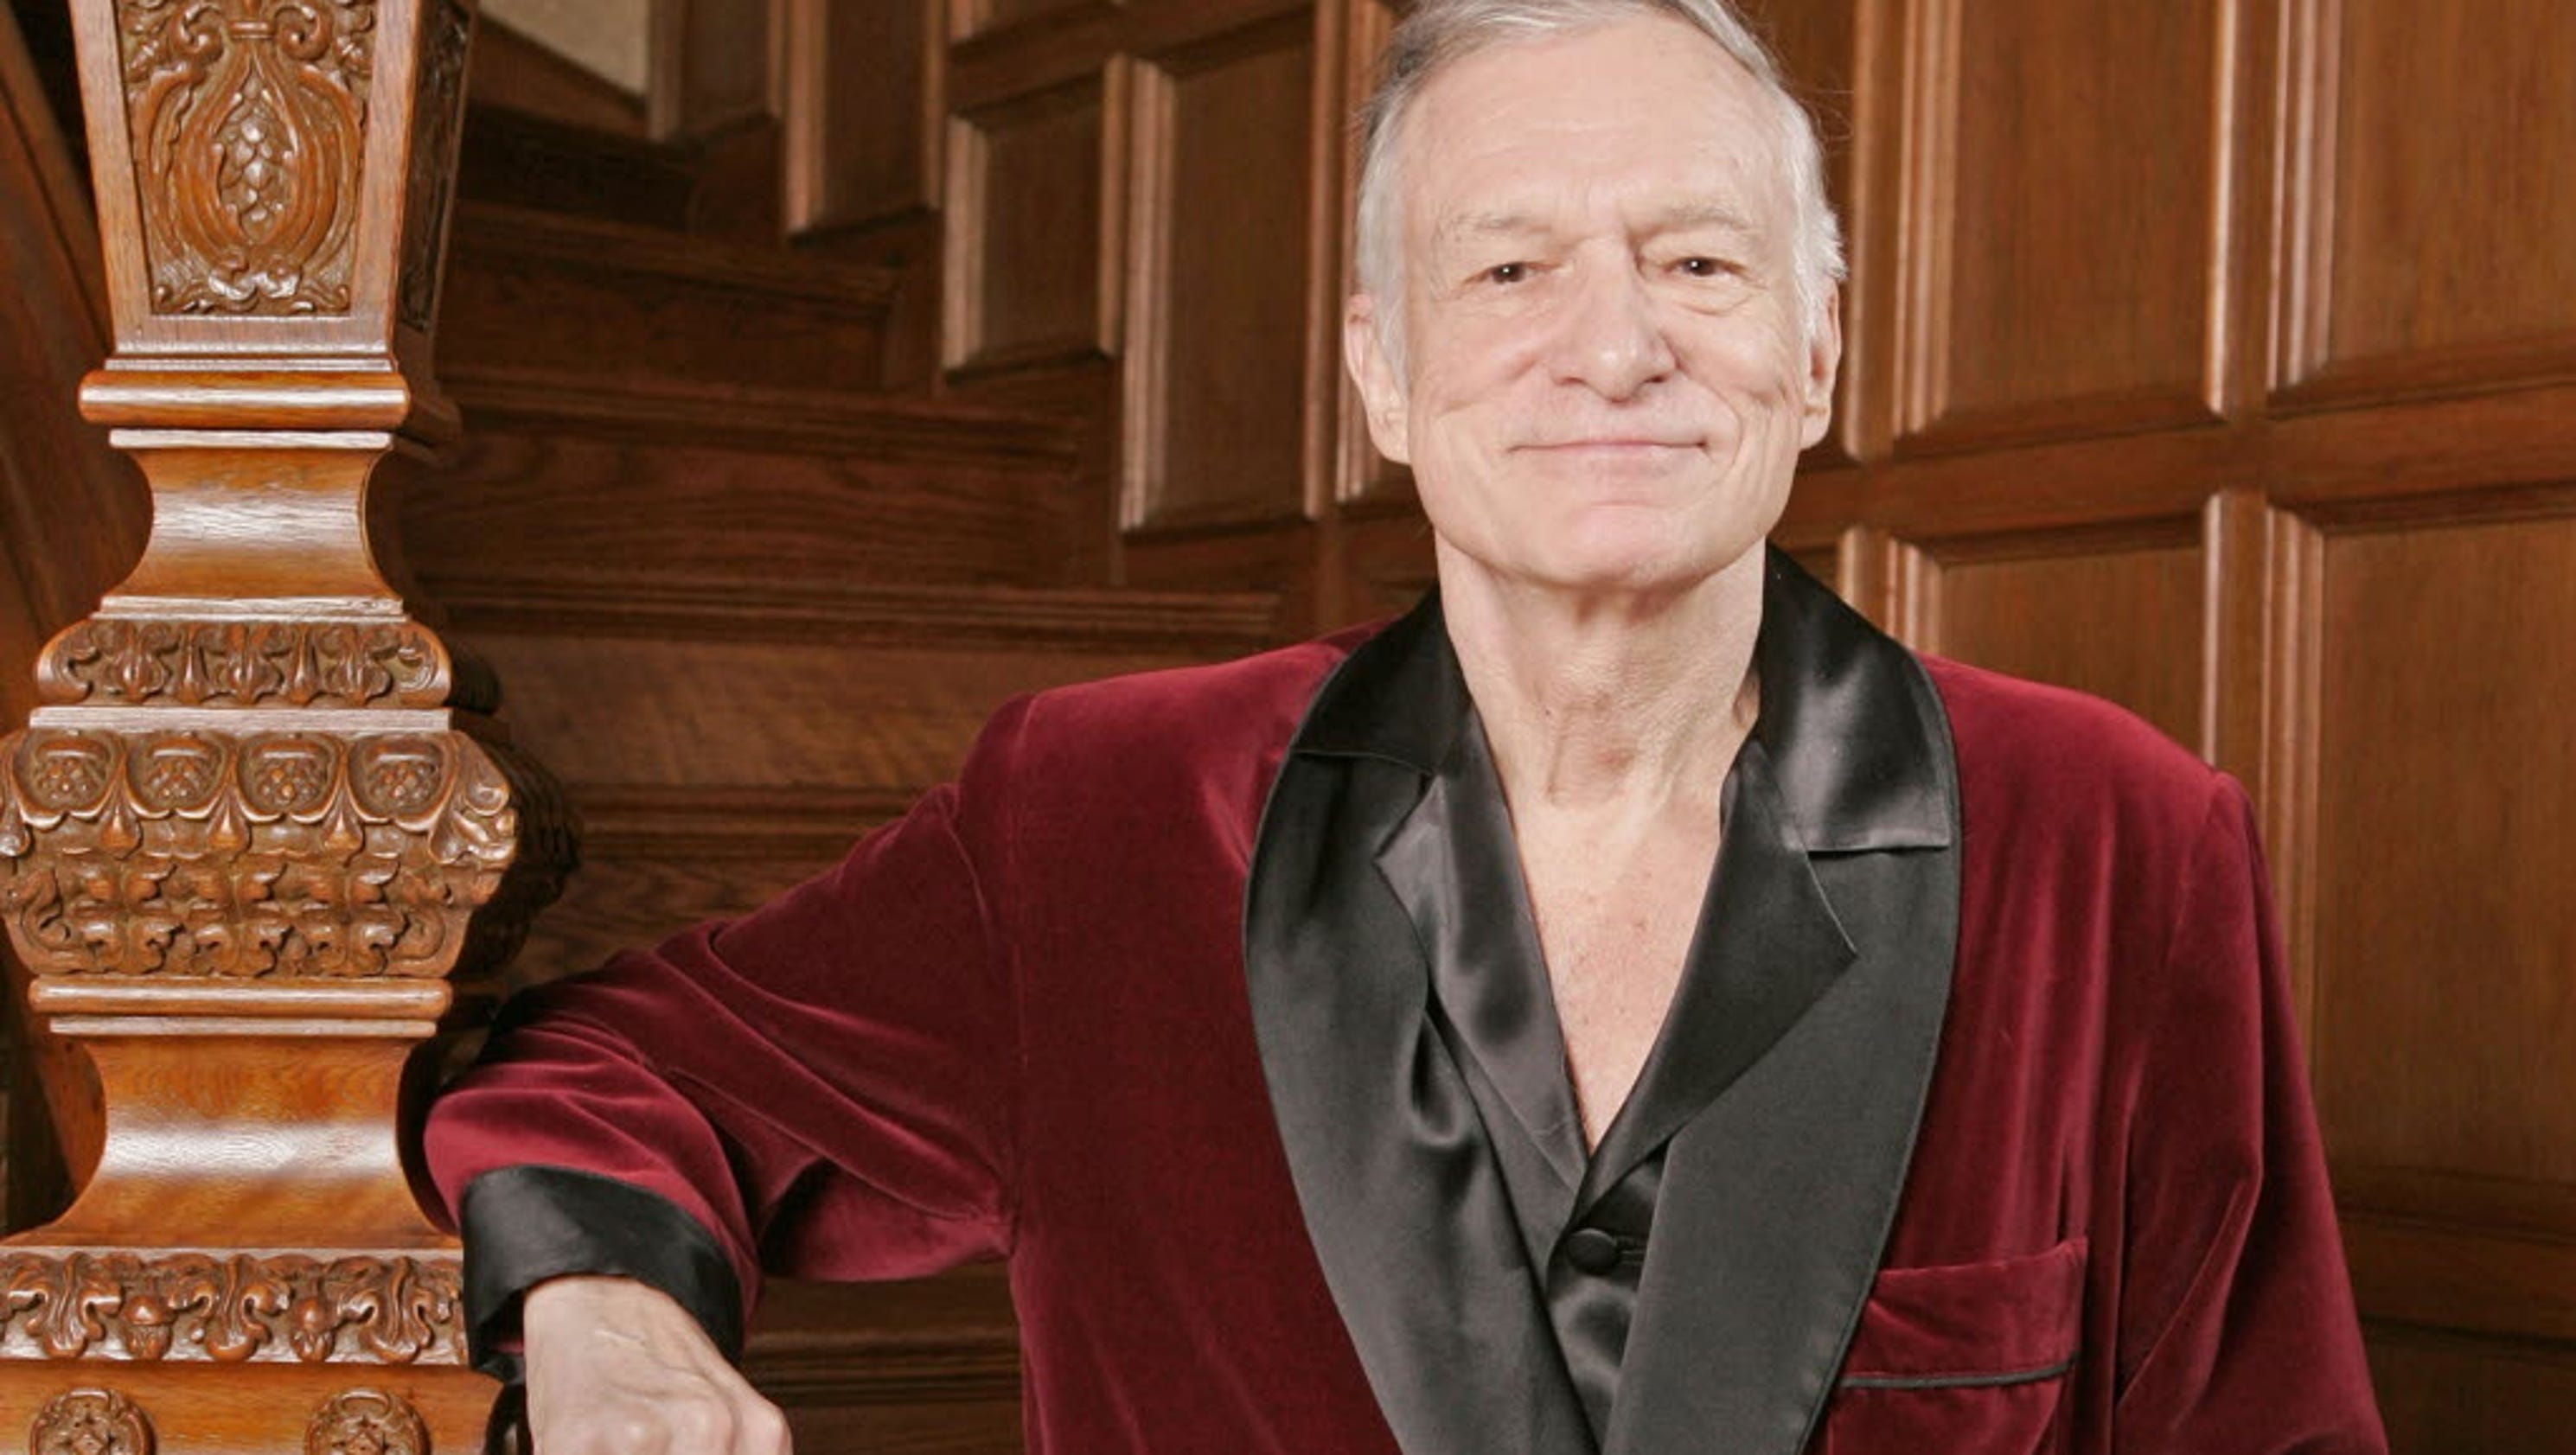 Hugh Hefner Founder Of Playboy And Iconic Playboy Mansion Dies At 91 ...